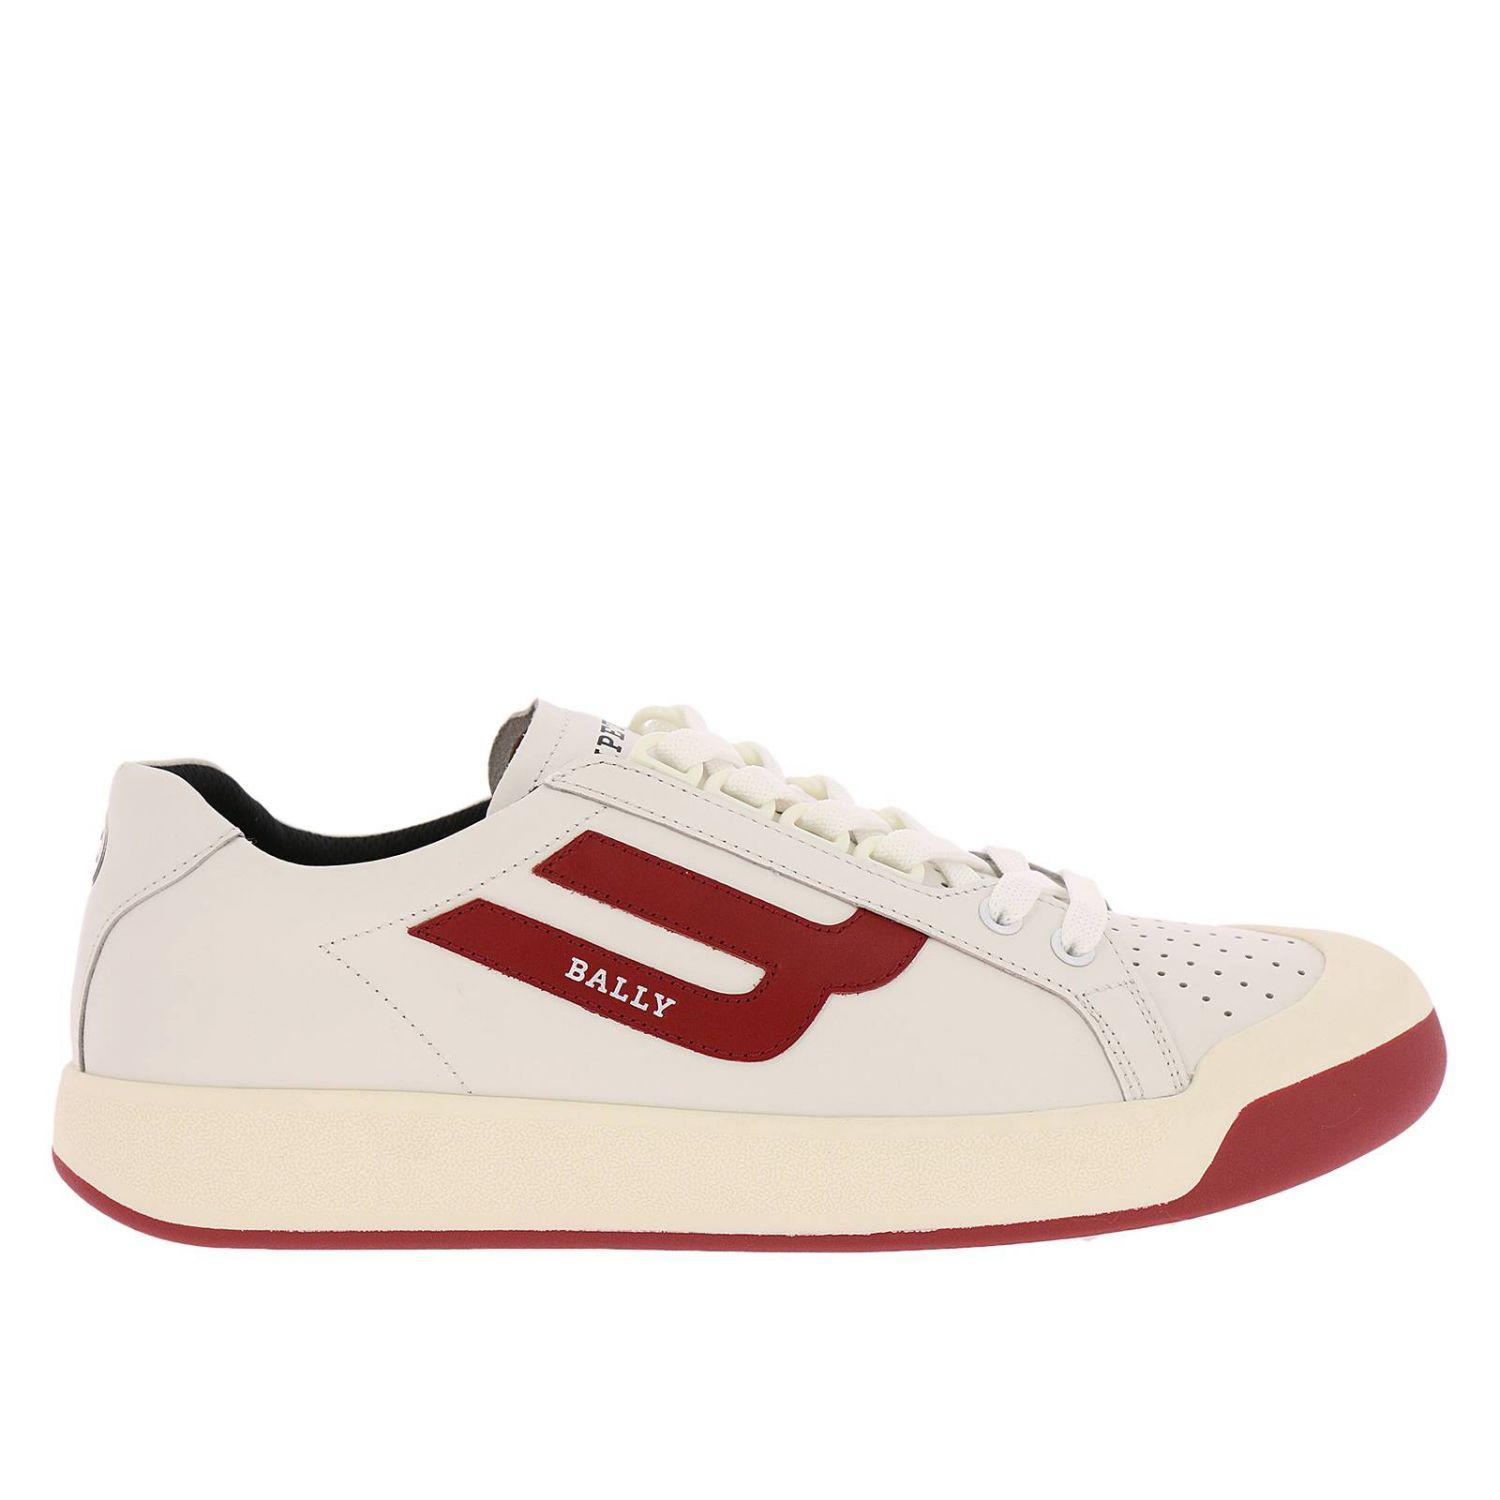 Bally Leather Men's New Competition Retro Low-top Sneakers, Red/white